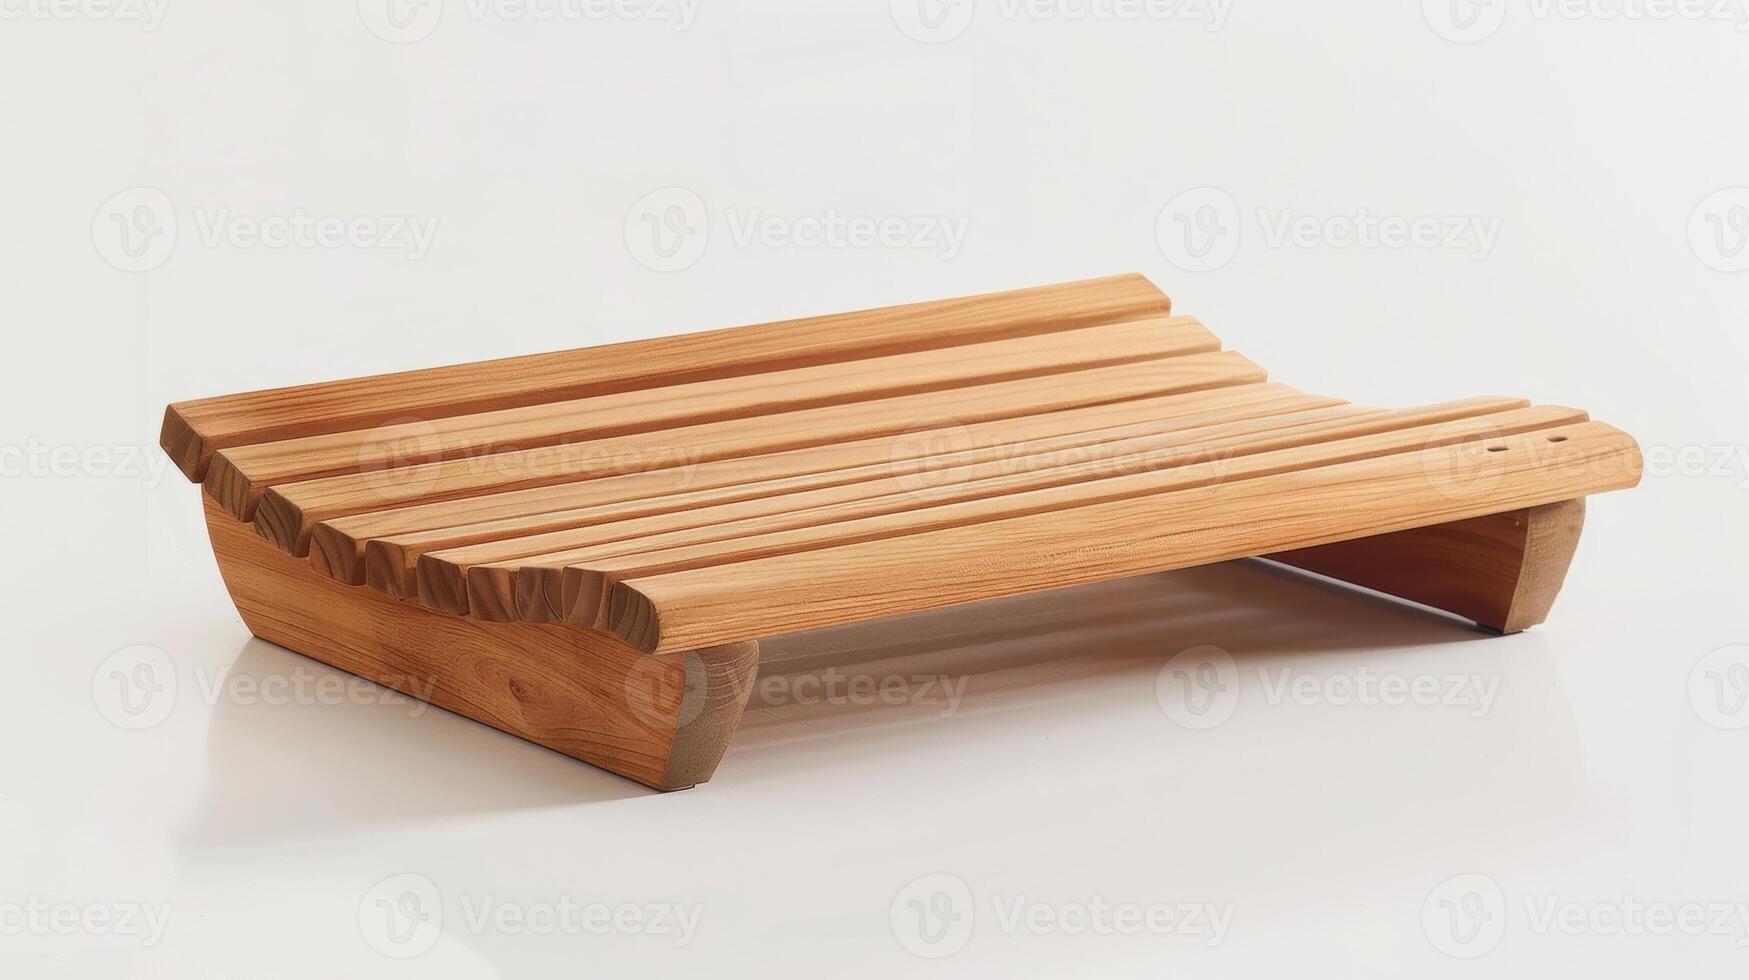 An adjustable wooden sauna backrest providing comfortable support for the back and spine during sauna sessions. photo